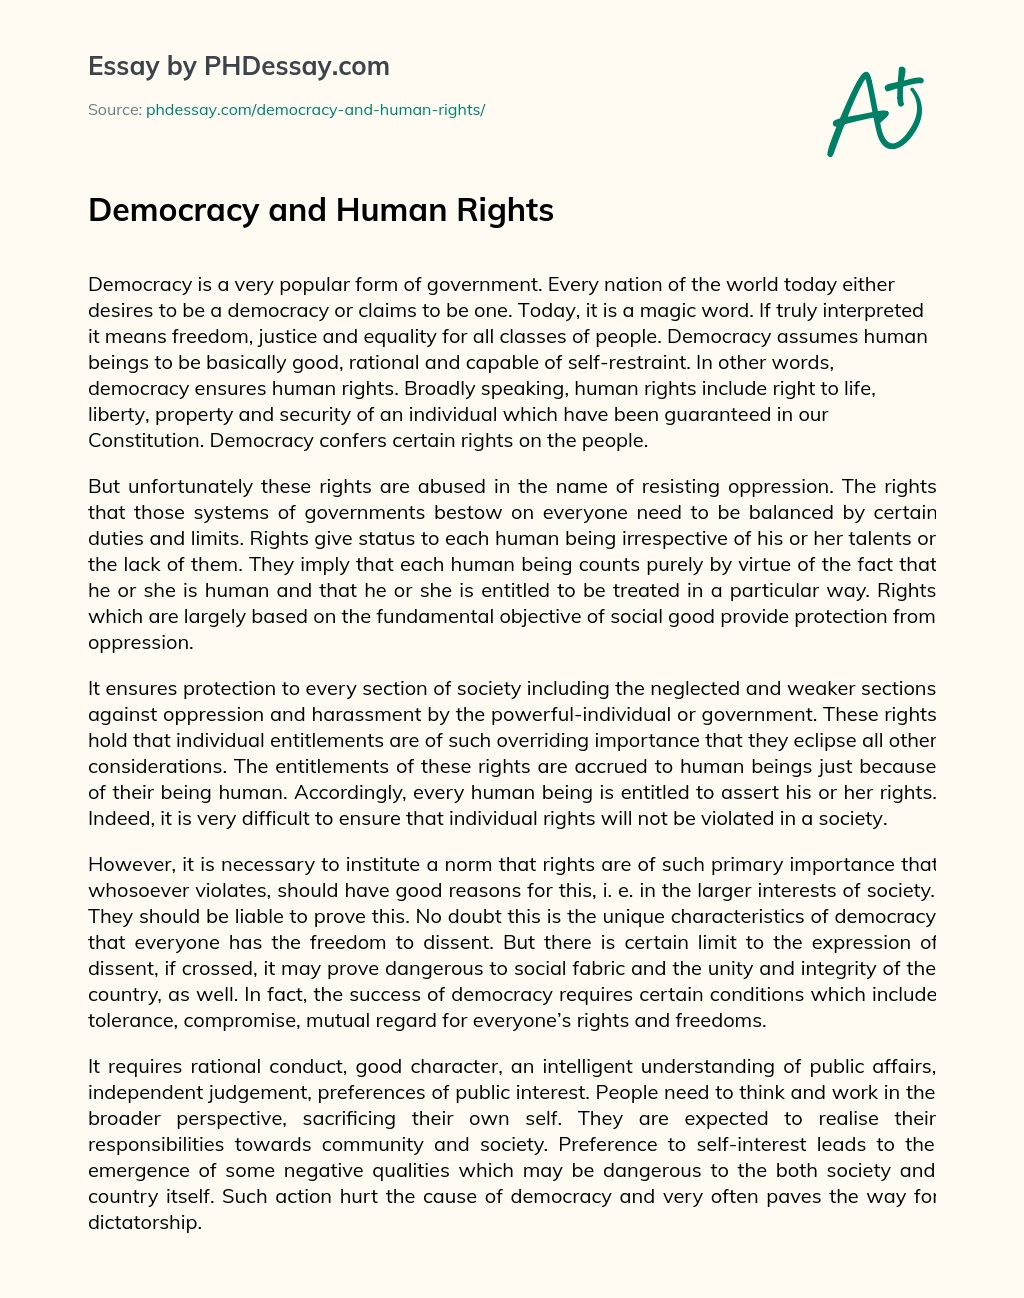 Democracy and Human Rights essay